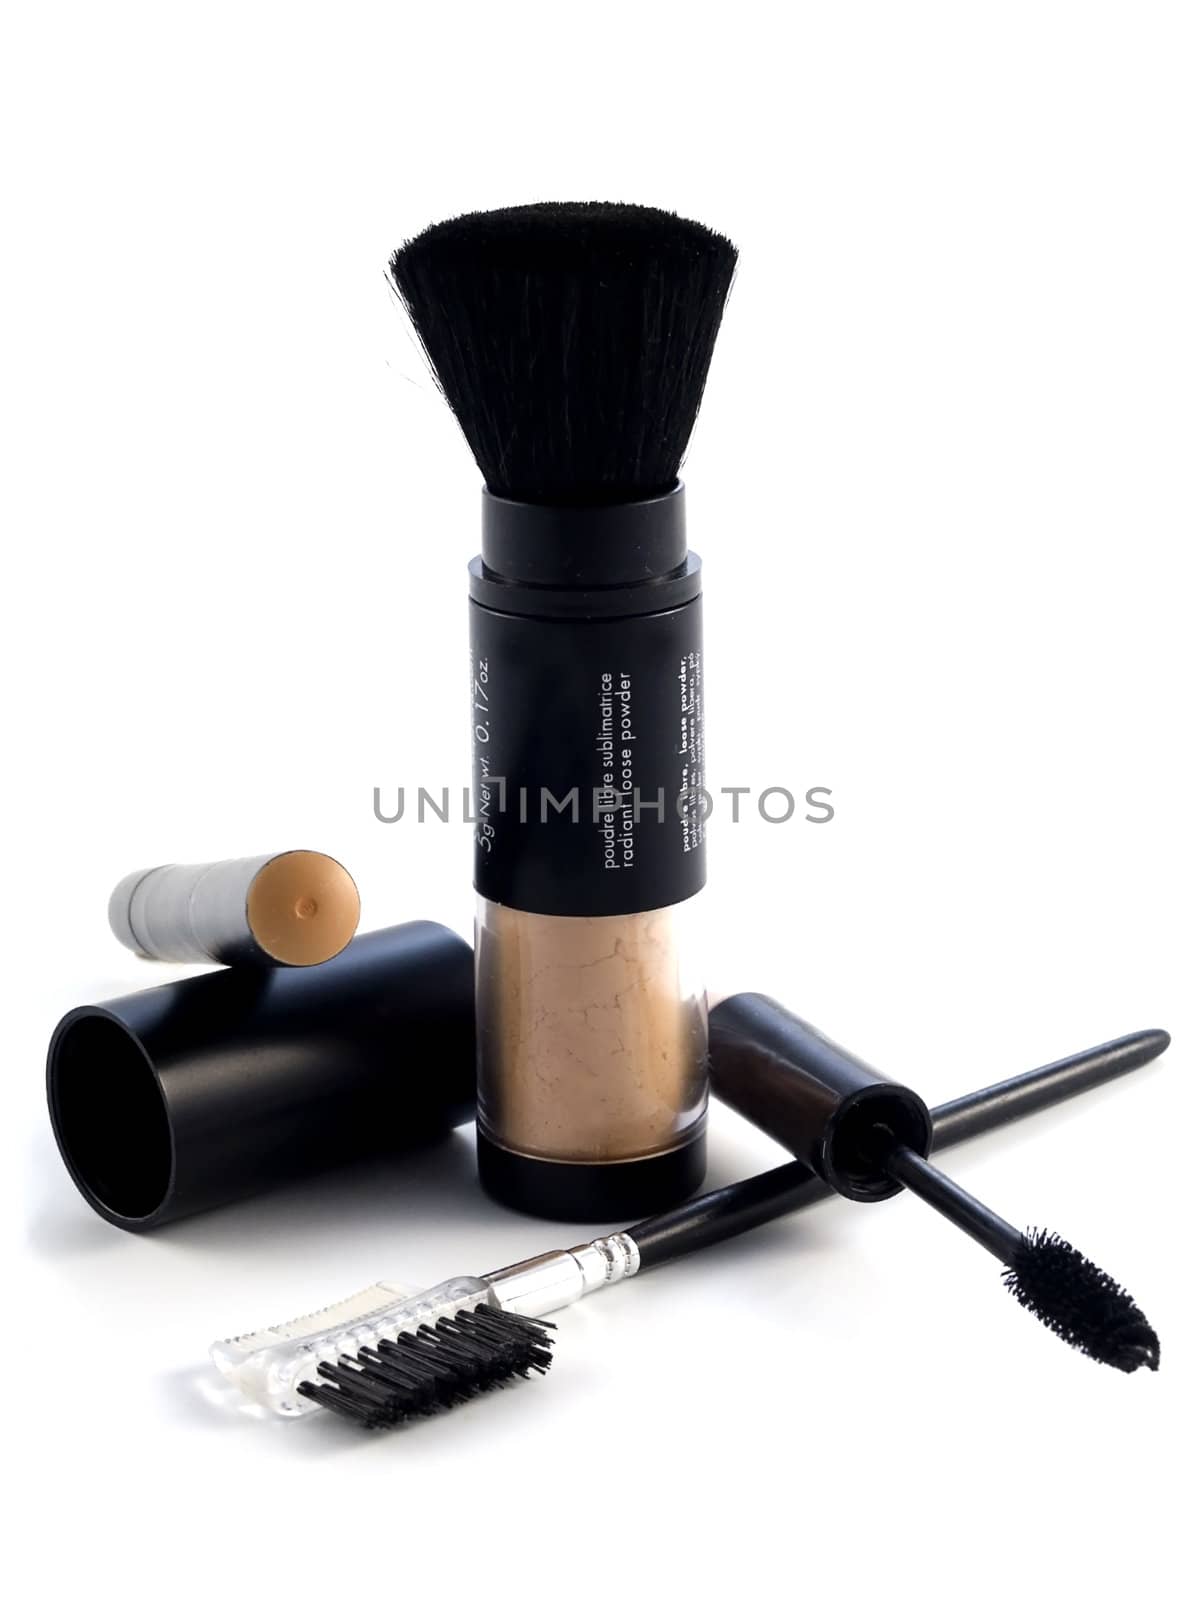 cosmetics series: Set of Face Cosmetics  on white background